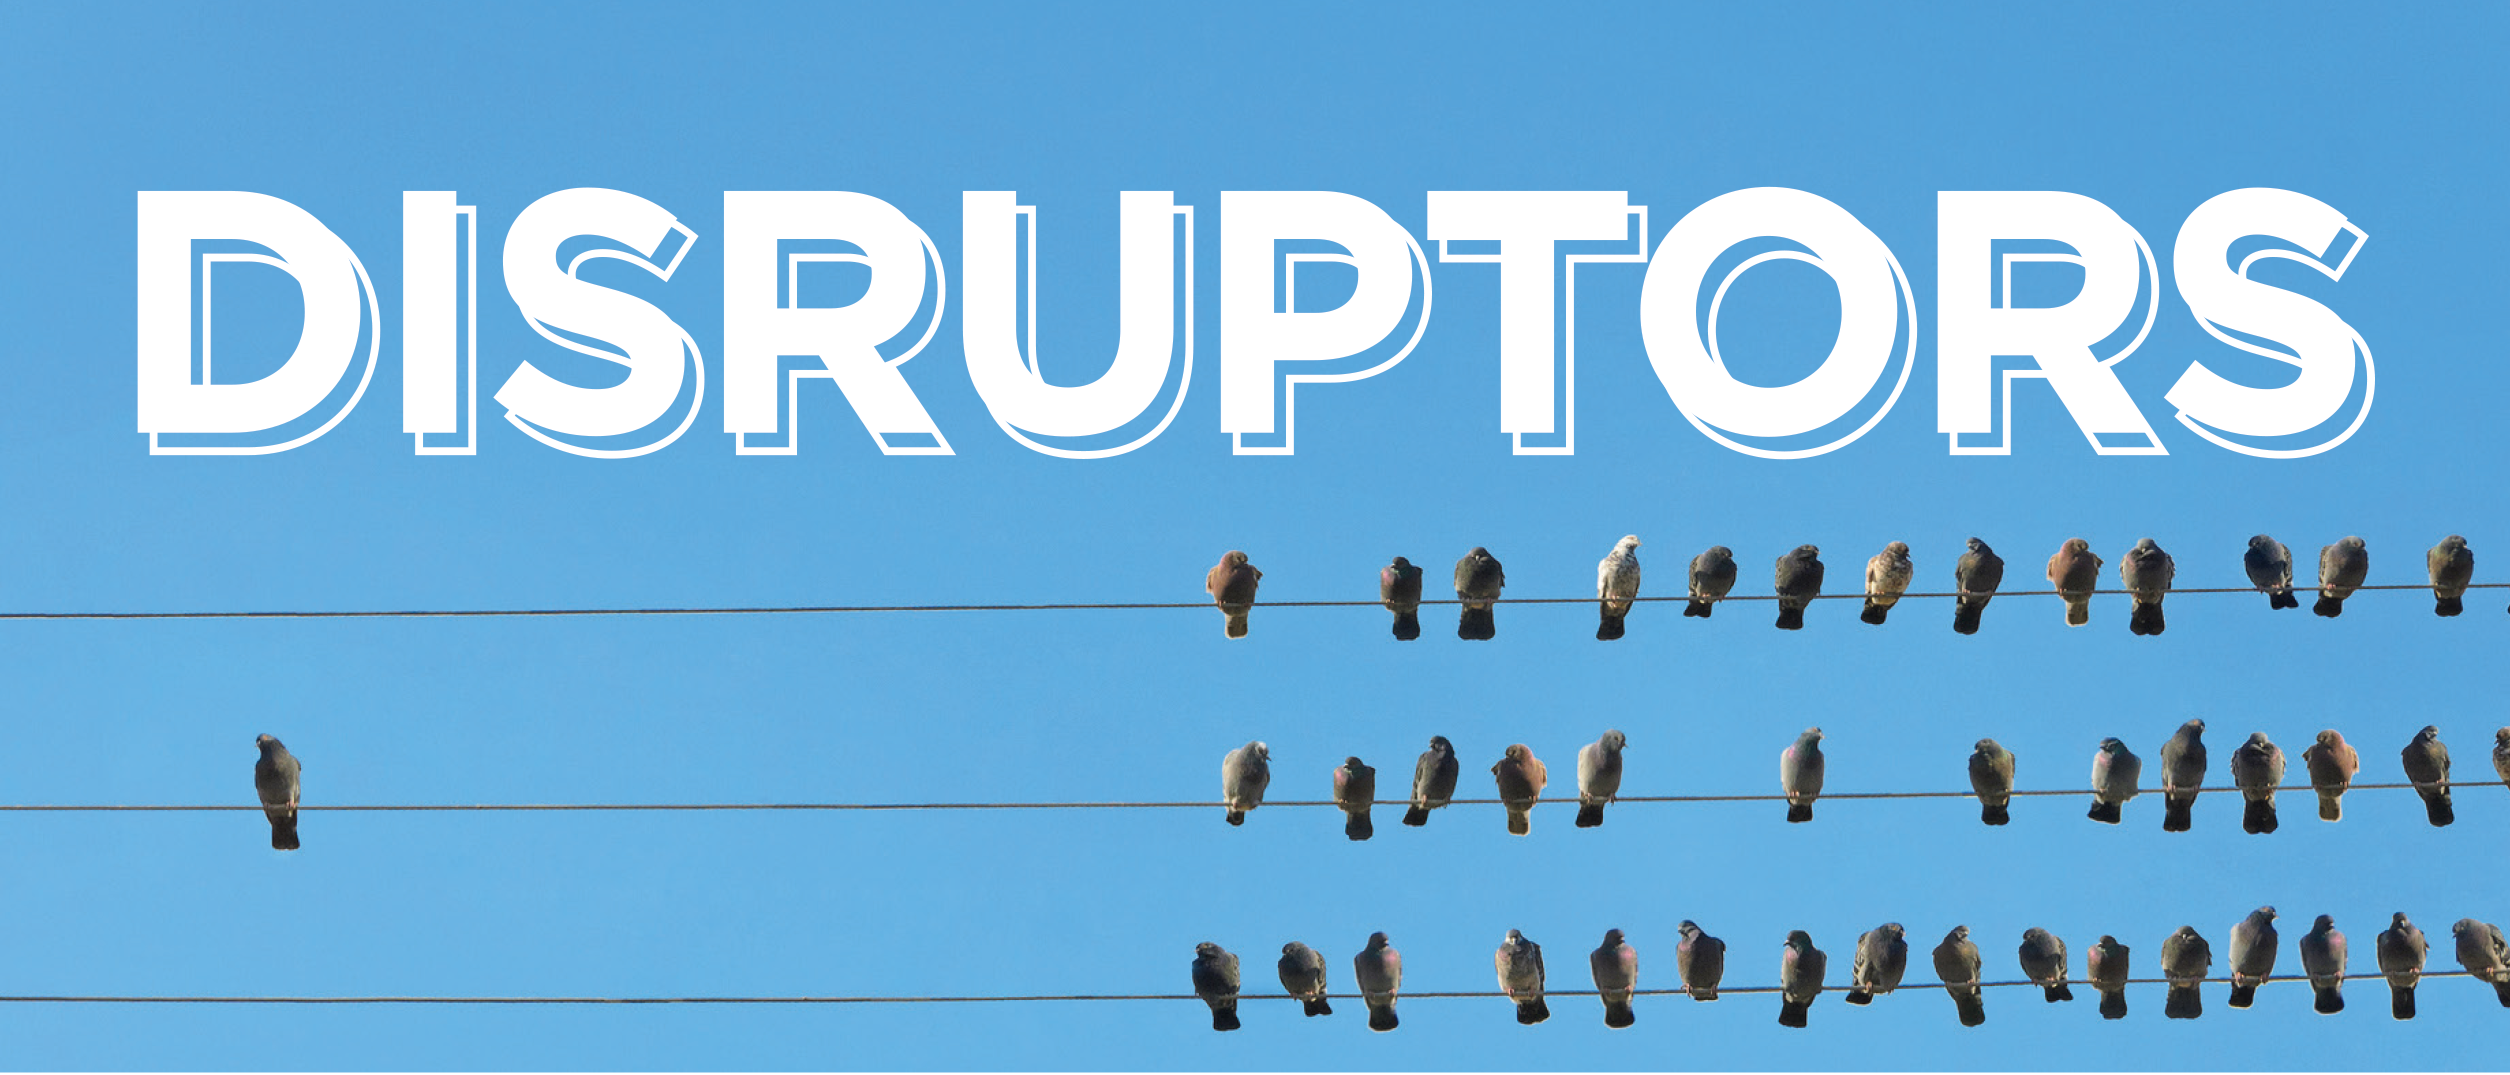 You are currently viewing Disruptors make history